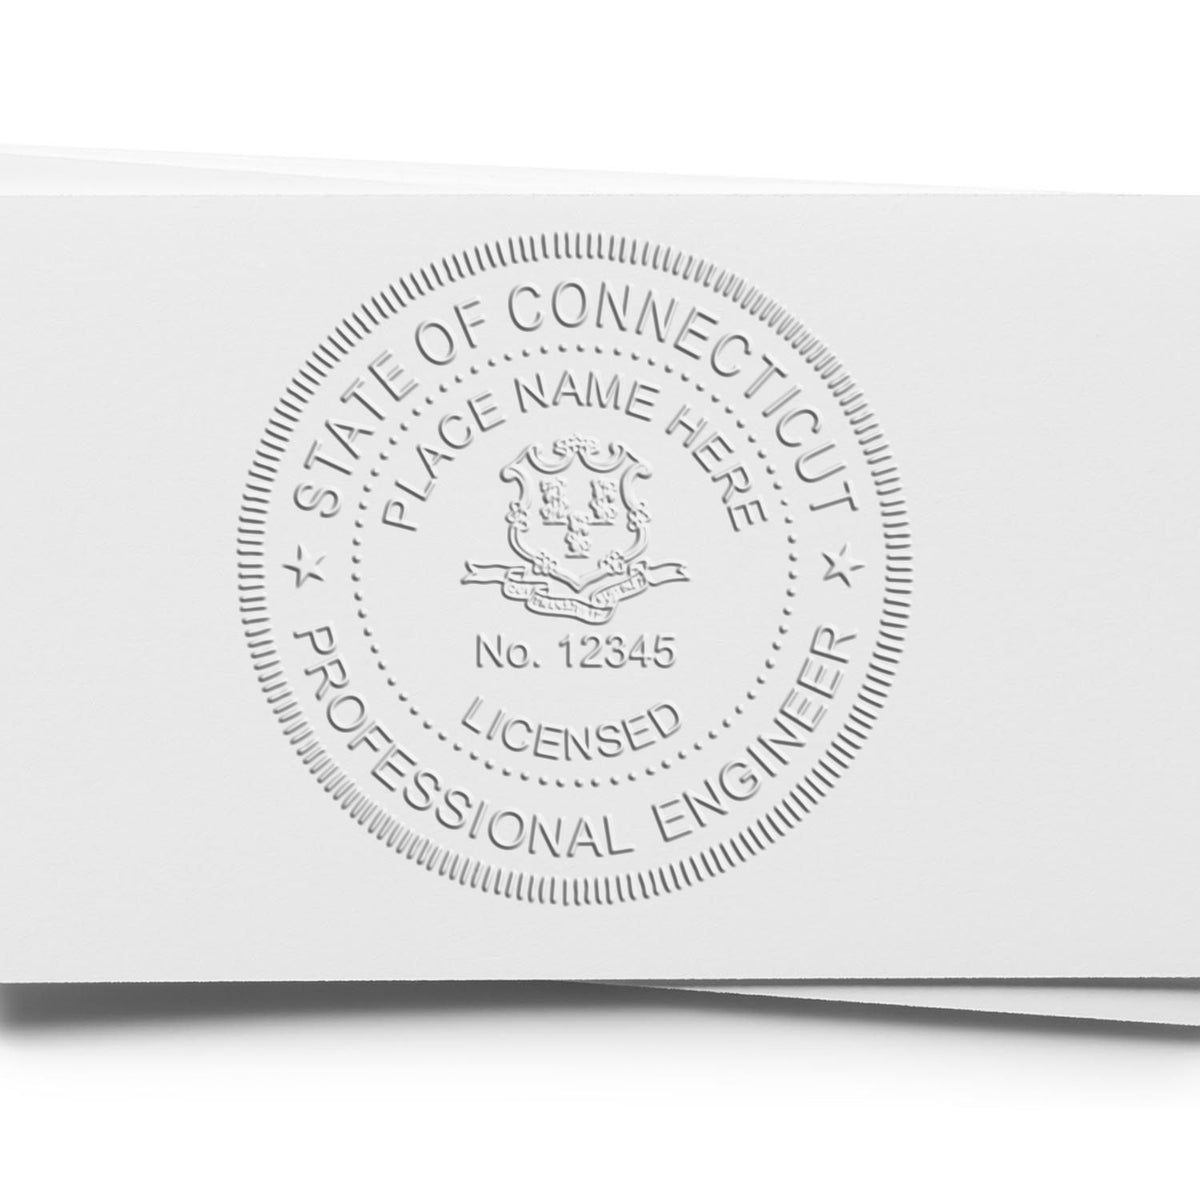 A stamped impression of the Soft Connecticut Professional Engineer Seal in this stylish lifestyle photo, setting the tone for a unique and personalized product.